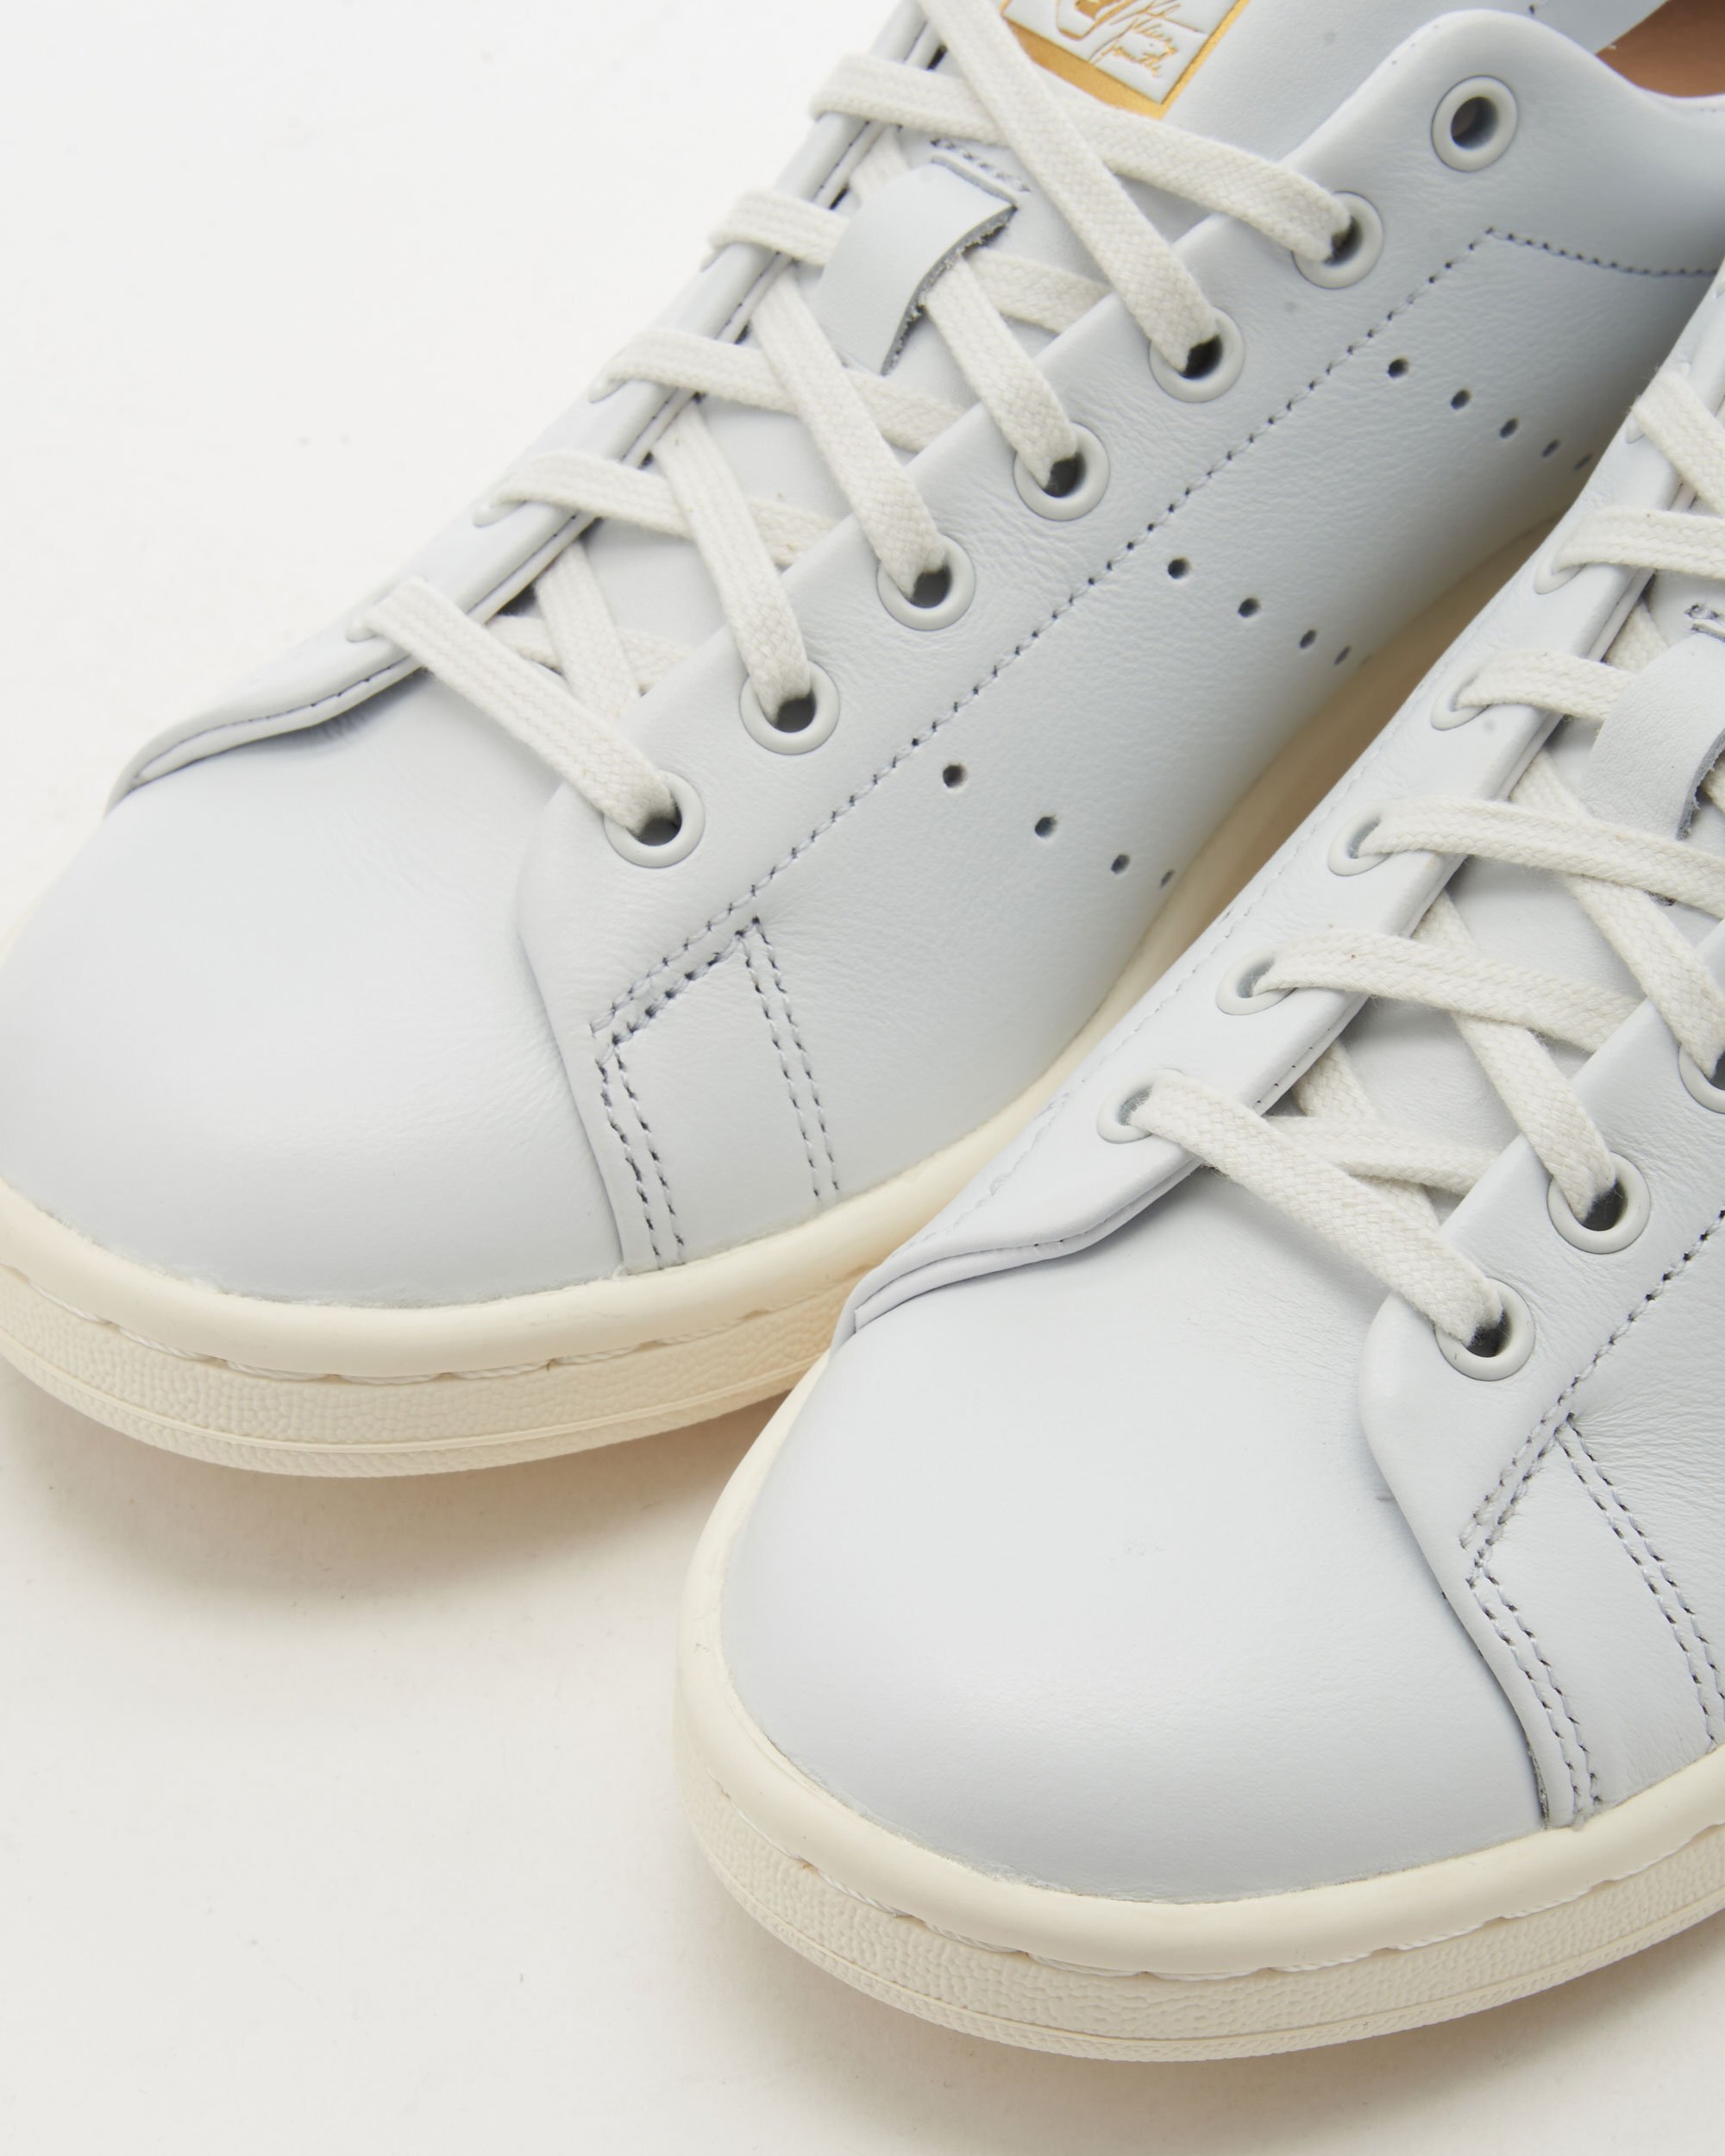 Adidas Gives the Stan Smith a Luxe New Update